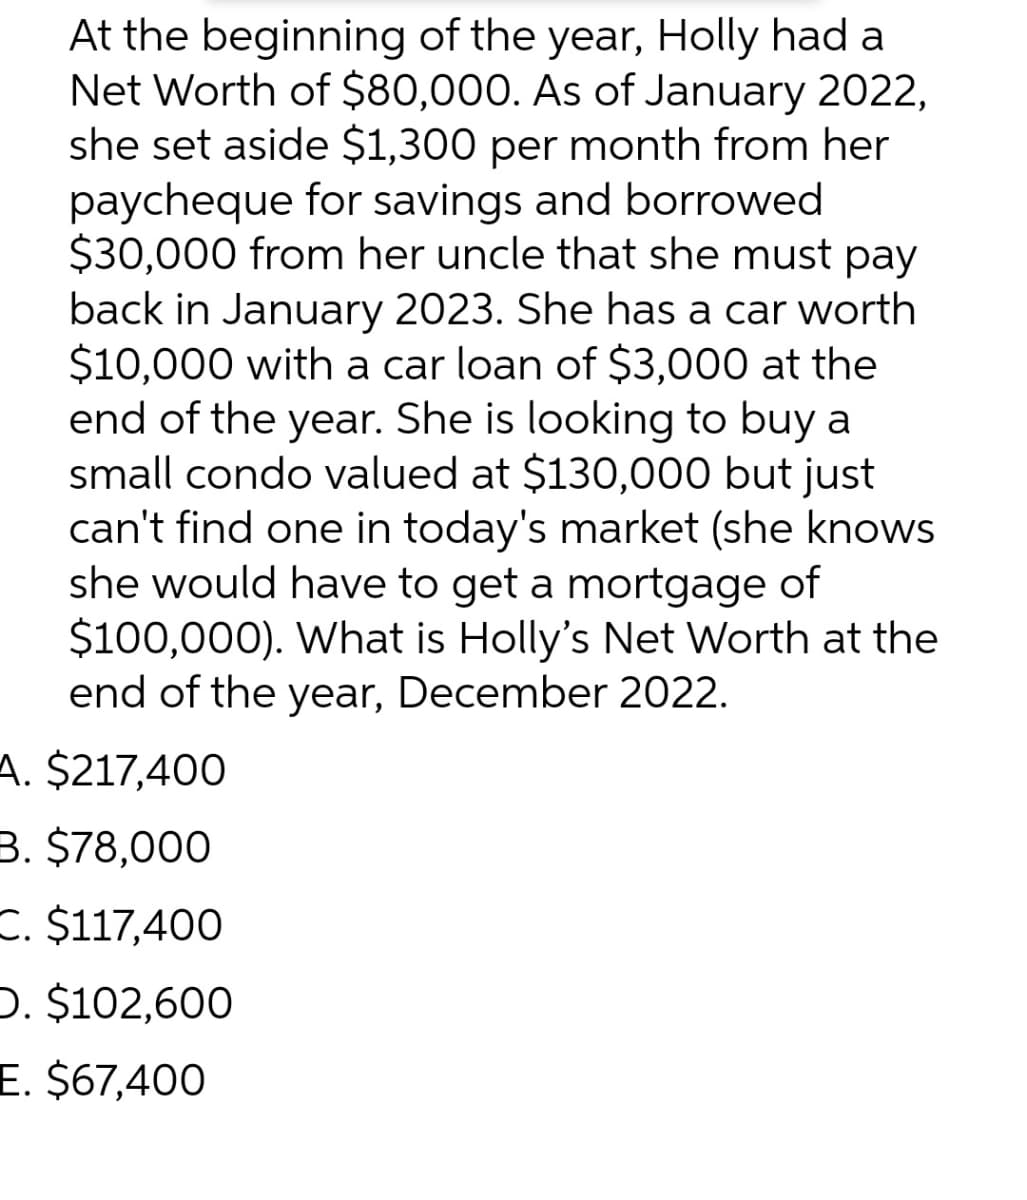 At the beginning of the year, Holly had a
Net Worth of $80,000. As of January 2022,
she set aside $1,300 per month from her
paycheque for savings and borrowed
$30,000 from her uncle that she must pay
back in January 2023. She has a car worth
$10,000 with a car loan of $3,000 at the
end of the year. She is looking to buy a
small condo valued at $130,000 but just
can't find one in today's market (she knows
she would have to get a mortgage of
$100,000). What is Holly's Net Worth at the
end of the year, December 2022.
A. $217,400
B. $78,000
C. $117,400
D. $102,600
E. $67,400
